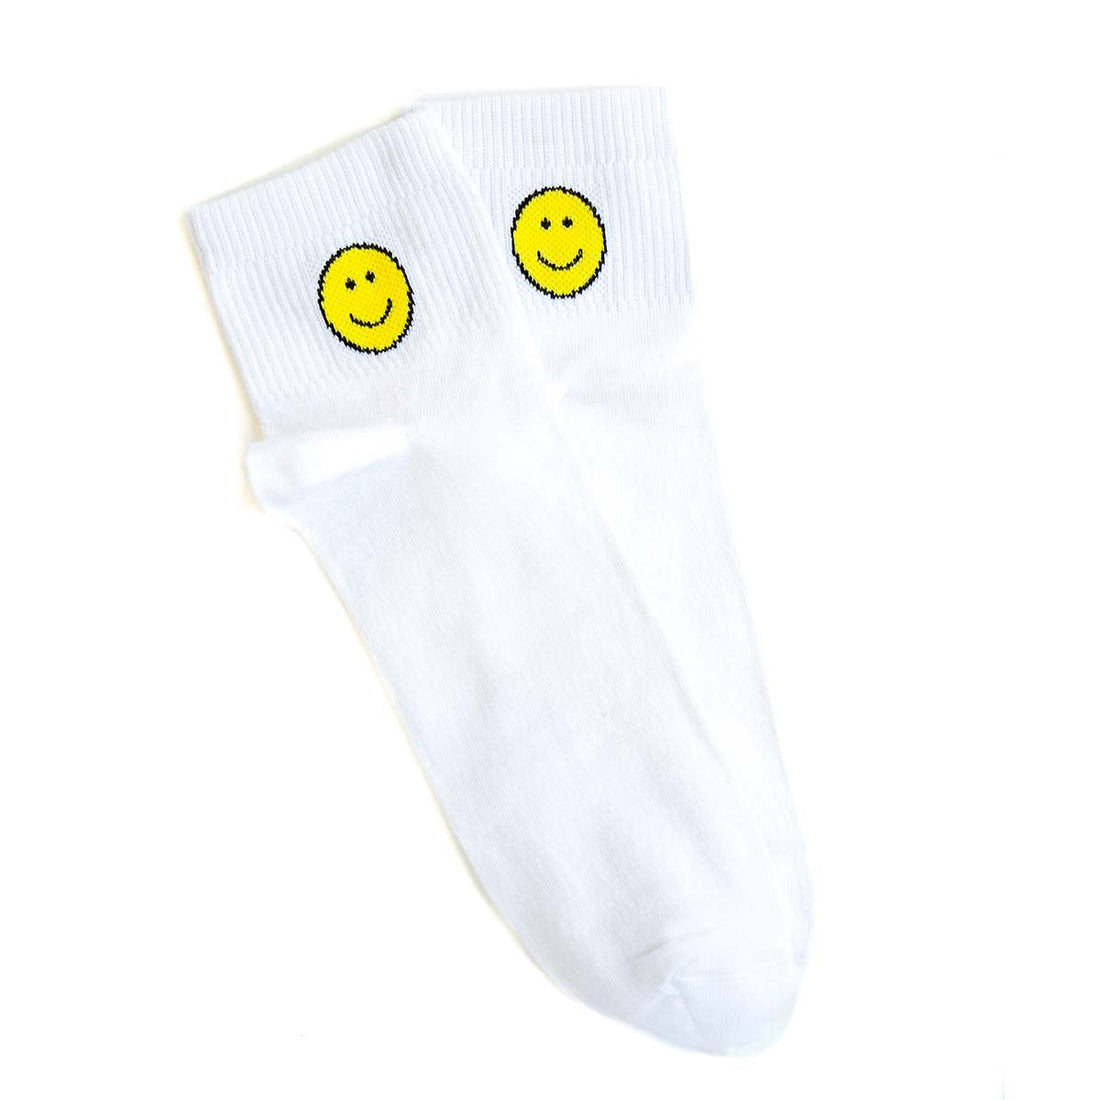 Socks with smiley